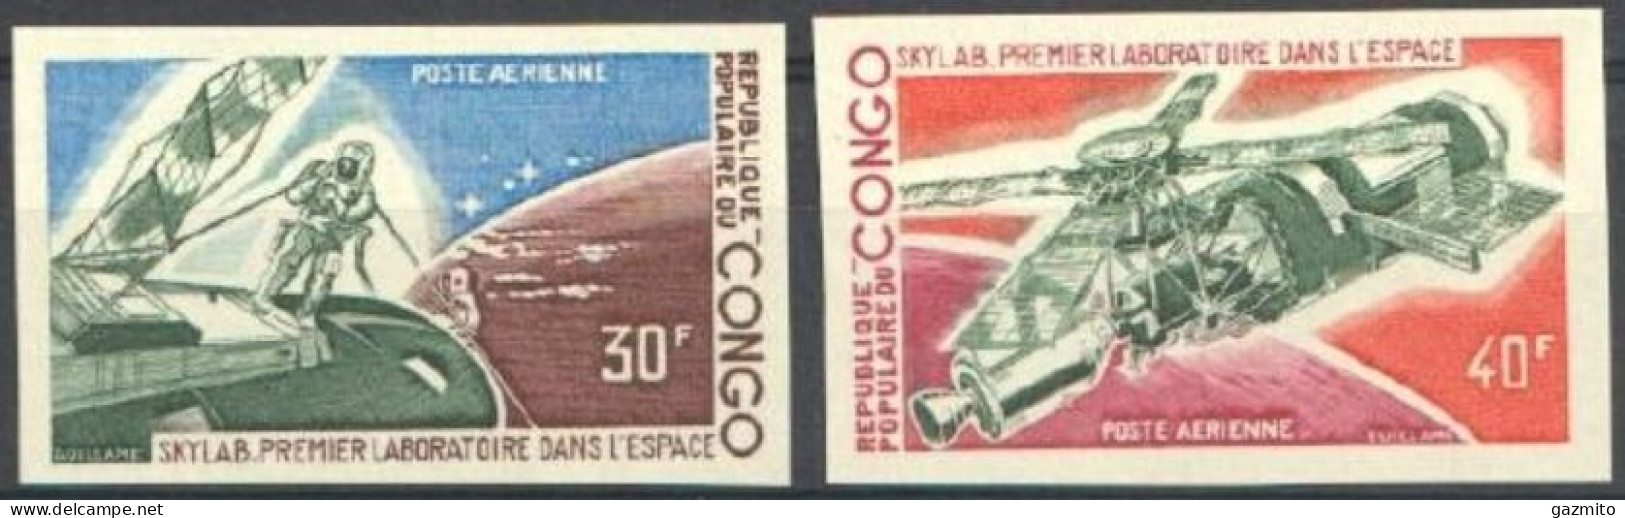 Congo Brazaville 1973, Airmail - Skylab Space Laboratory, 2val IMPERFORATED - Afrique